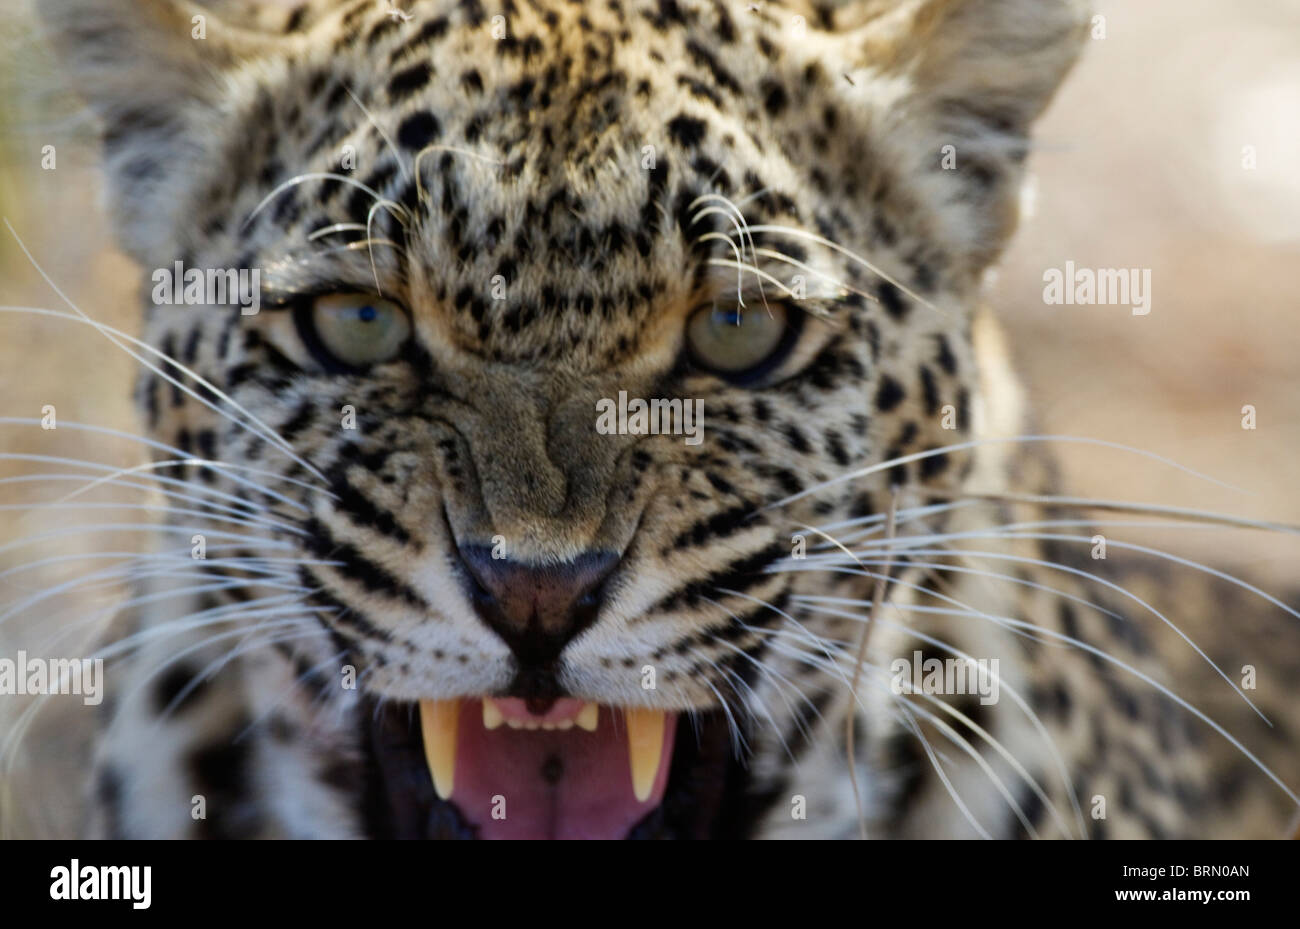 Tight portrait of a leopard snarling Stock Photo